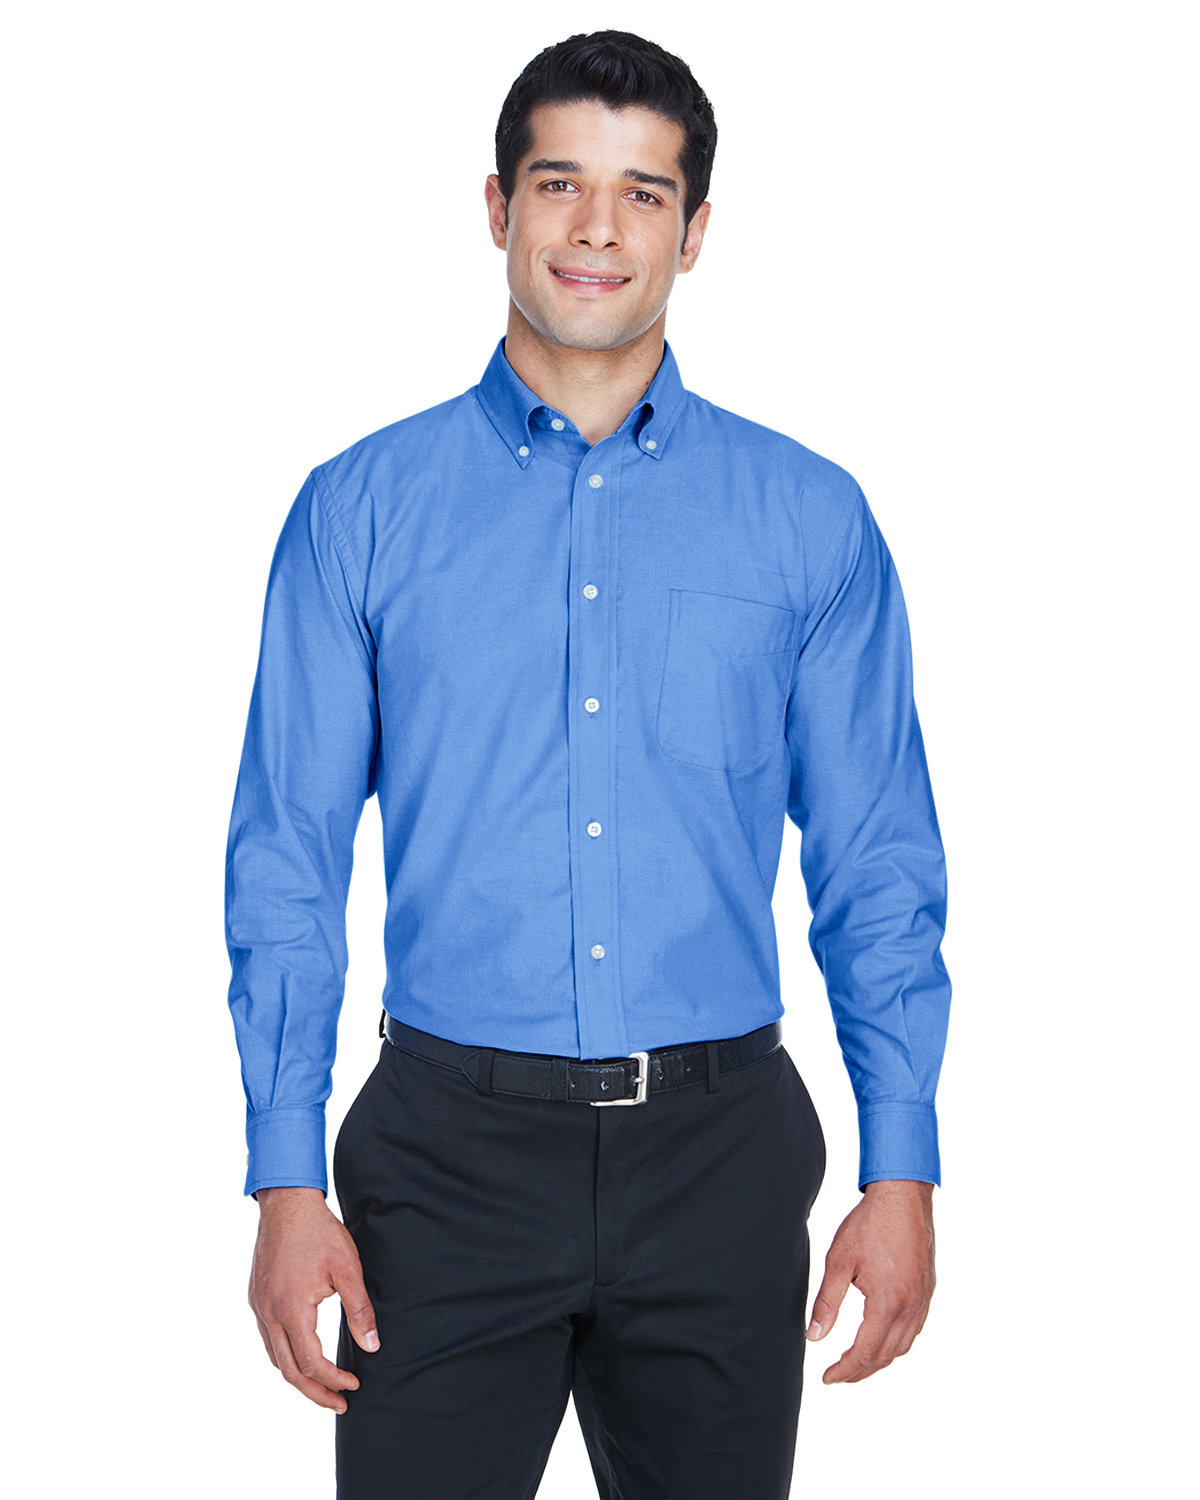 G010 M600 Mens Long-Sleeve Oxford with Stain-Release